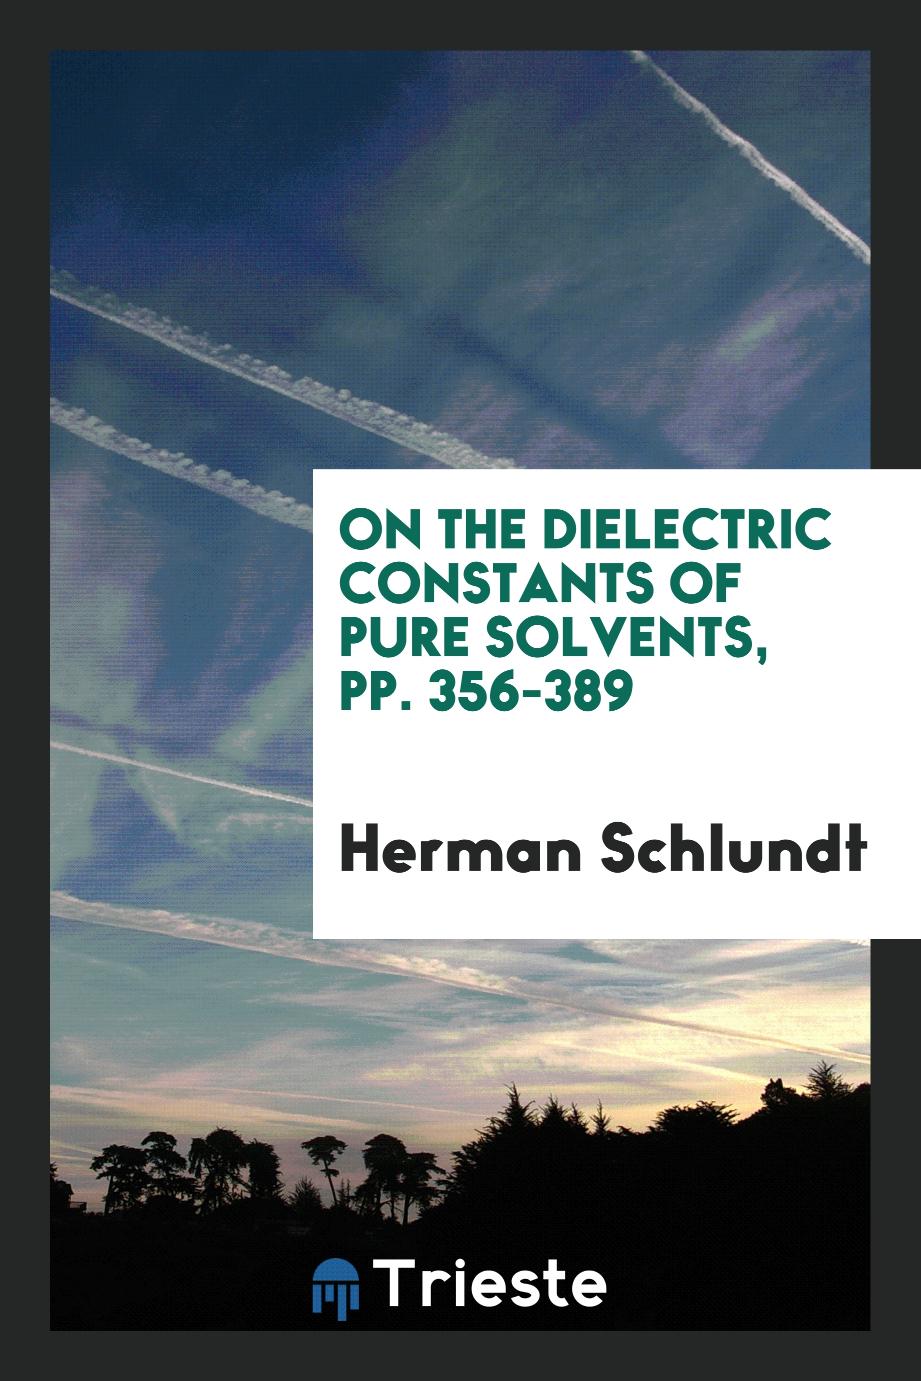 On the dielectric constants of pure solvents, pp. 356-389